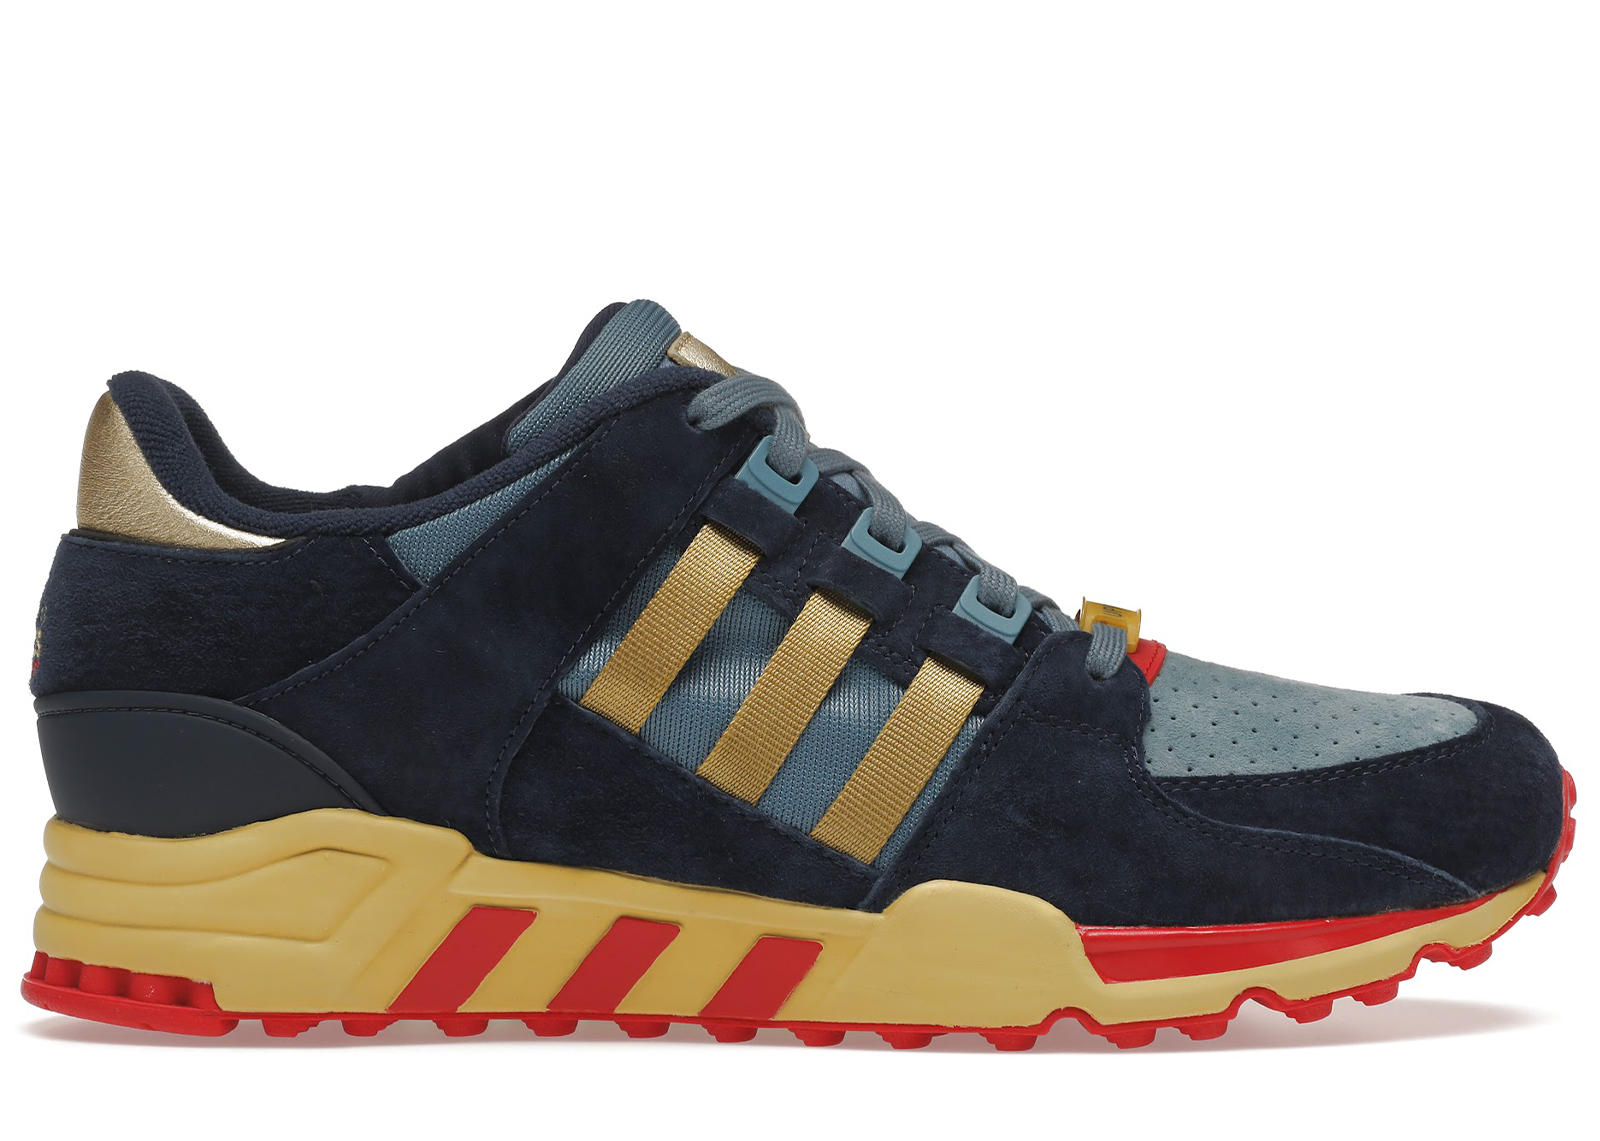 packer shoes x adidas eqt running support 93